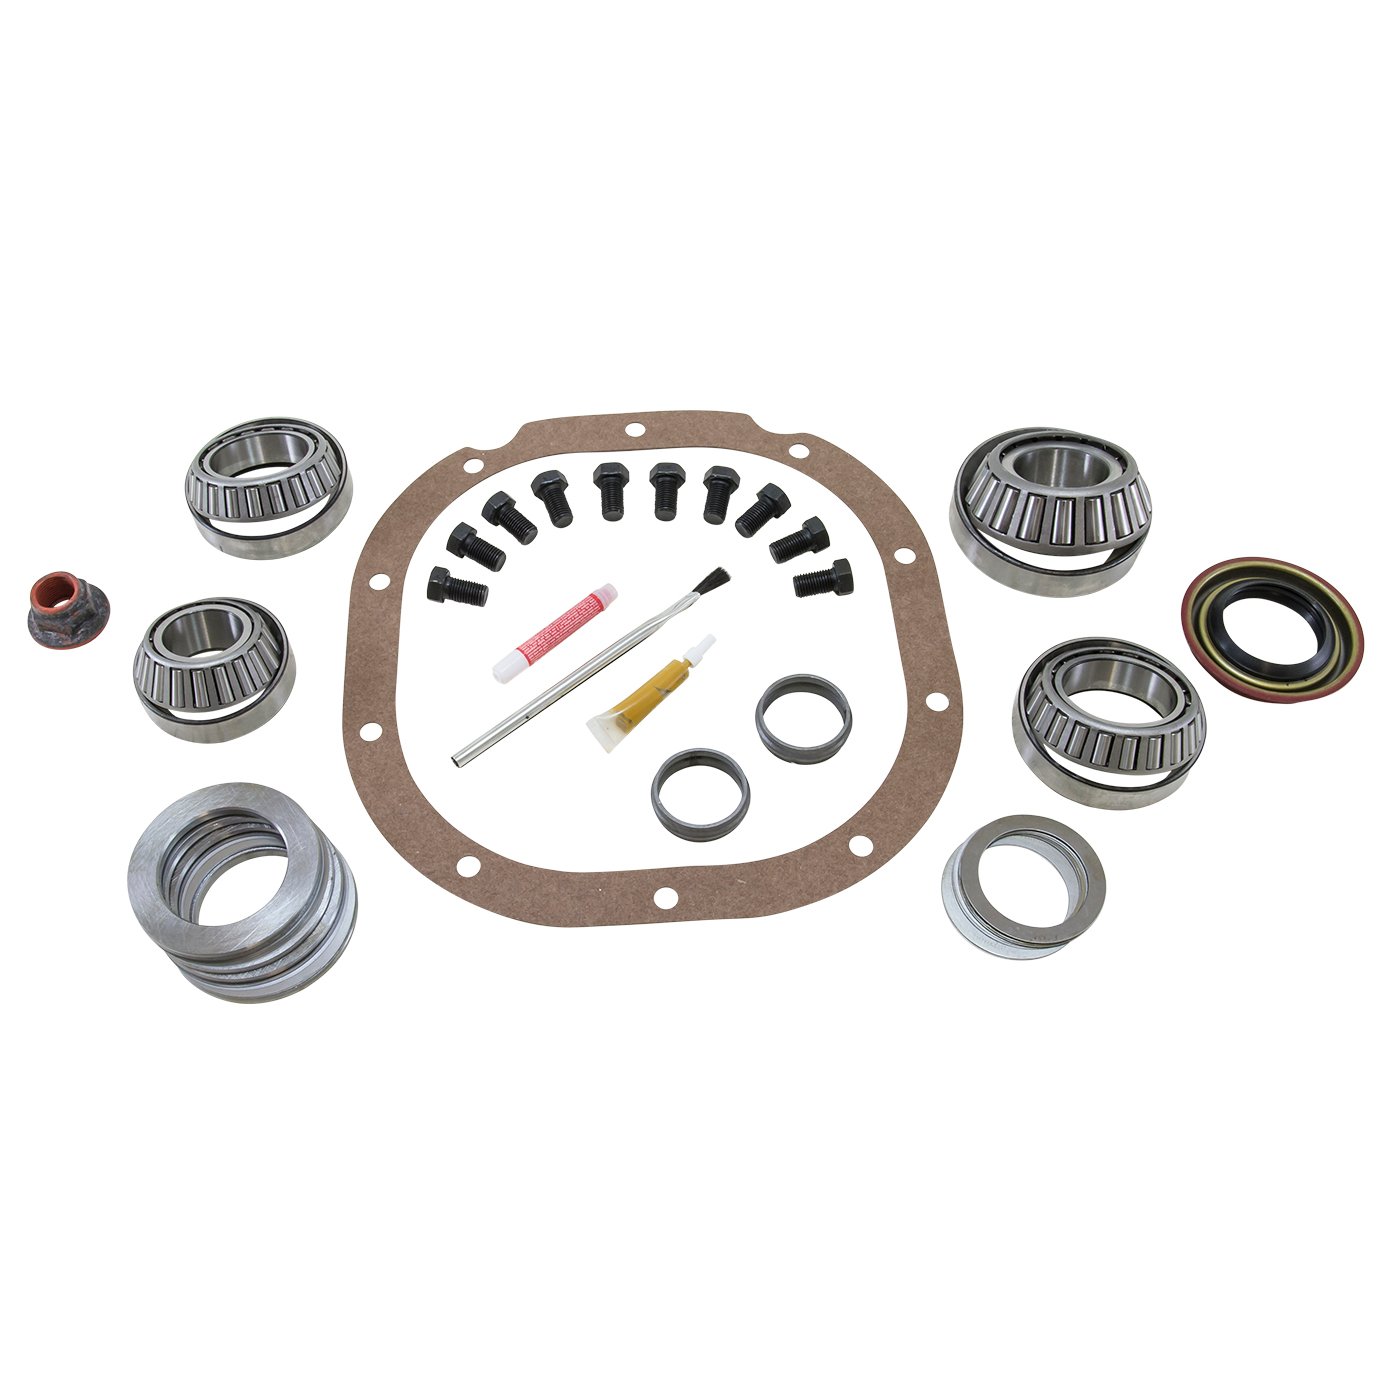 USA Standard 37031 Master Overhaul Kit, For The Ford 8.8 in. Irs Rear Differential, For Suv